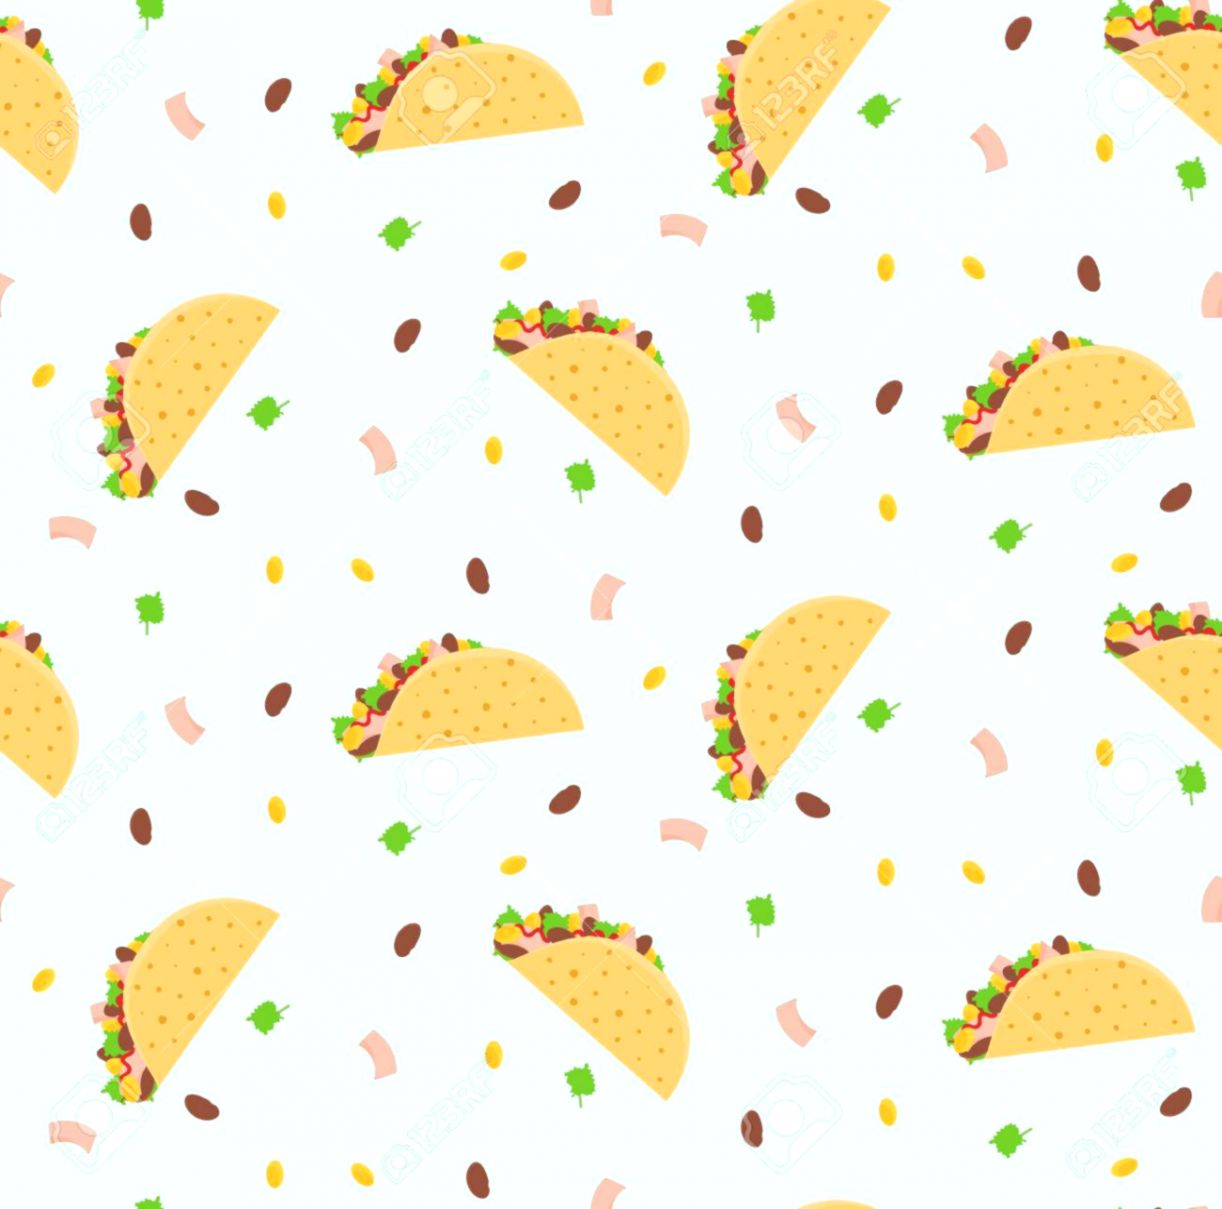 Tacos Background And Wallpaper Image  Taco Background Png PNG Image   Transparent PNG Free Download on SeekPNG